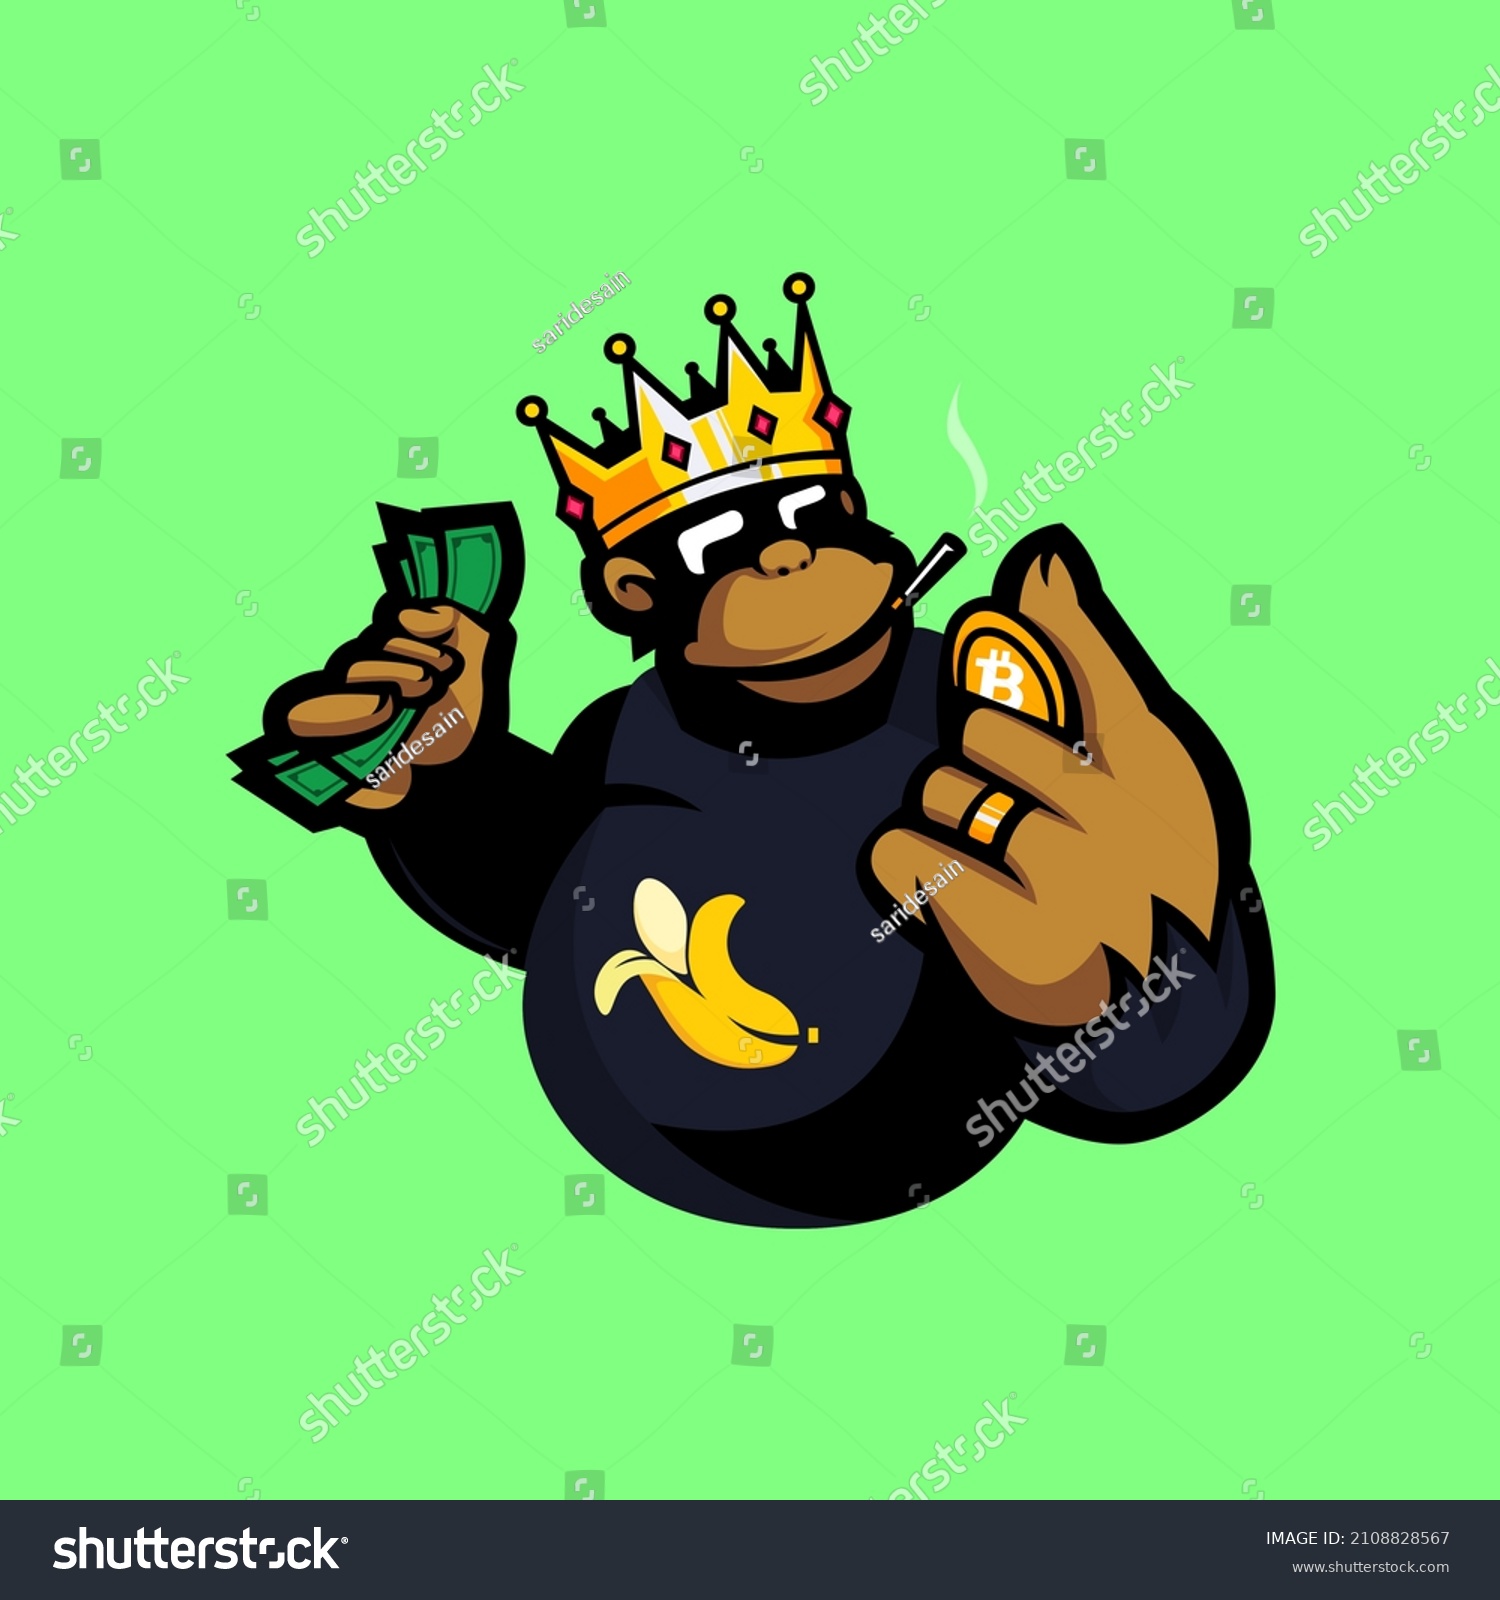 SVG of Illustration of king gorilla rich brings crypto coins and money svg